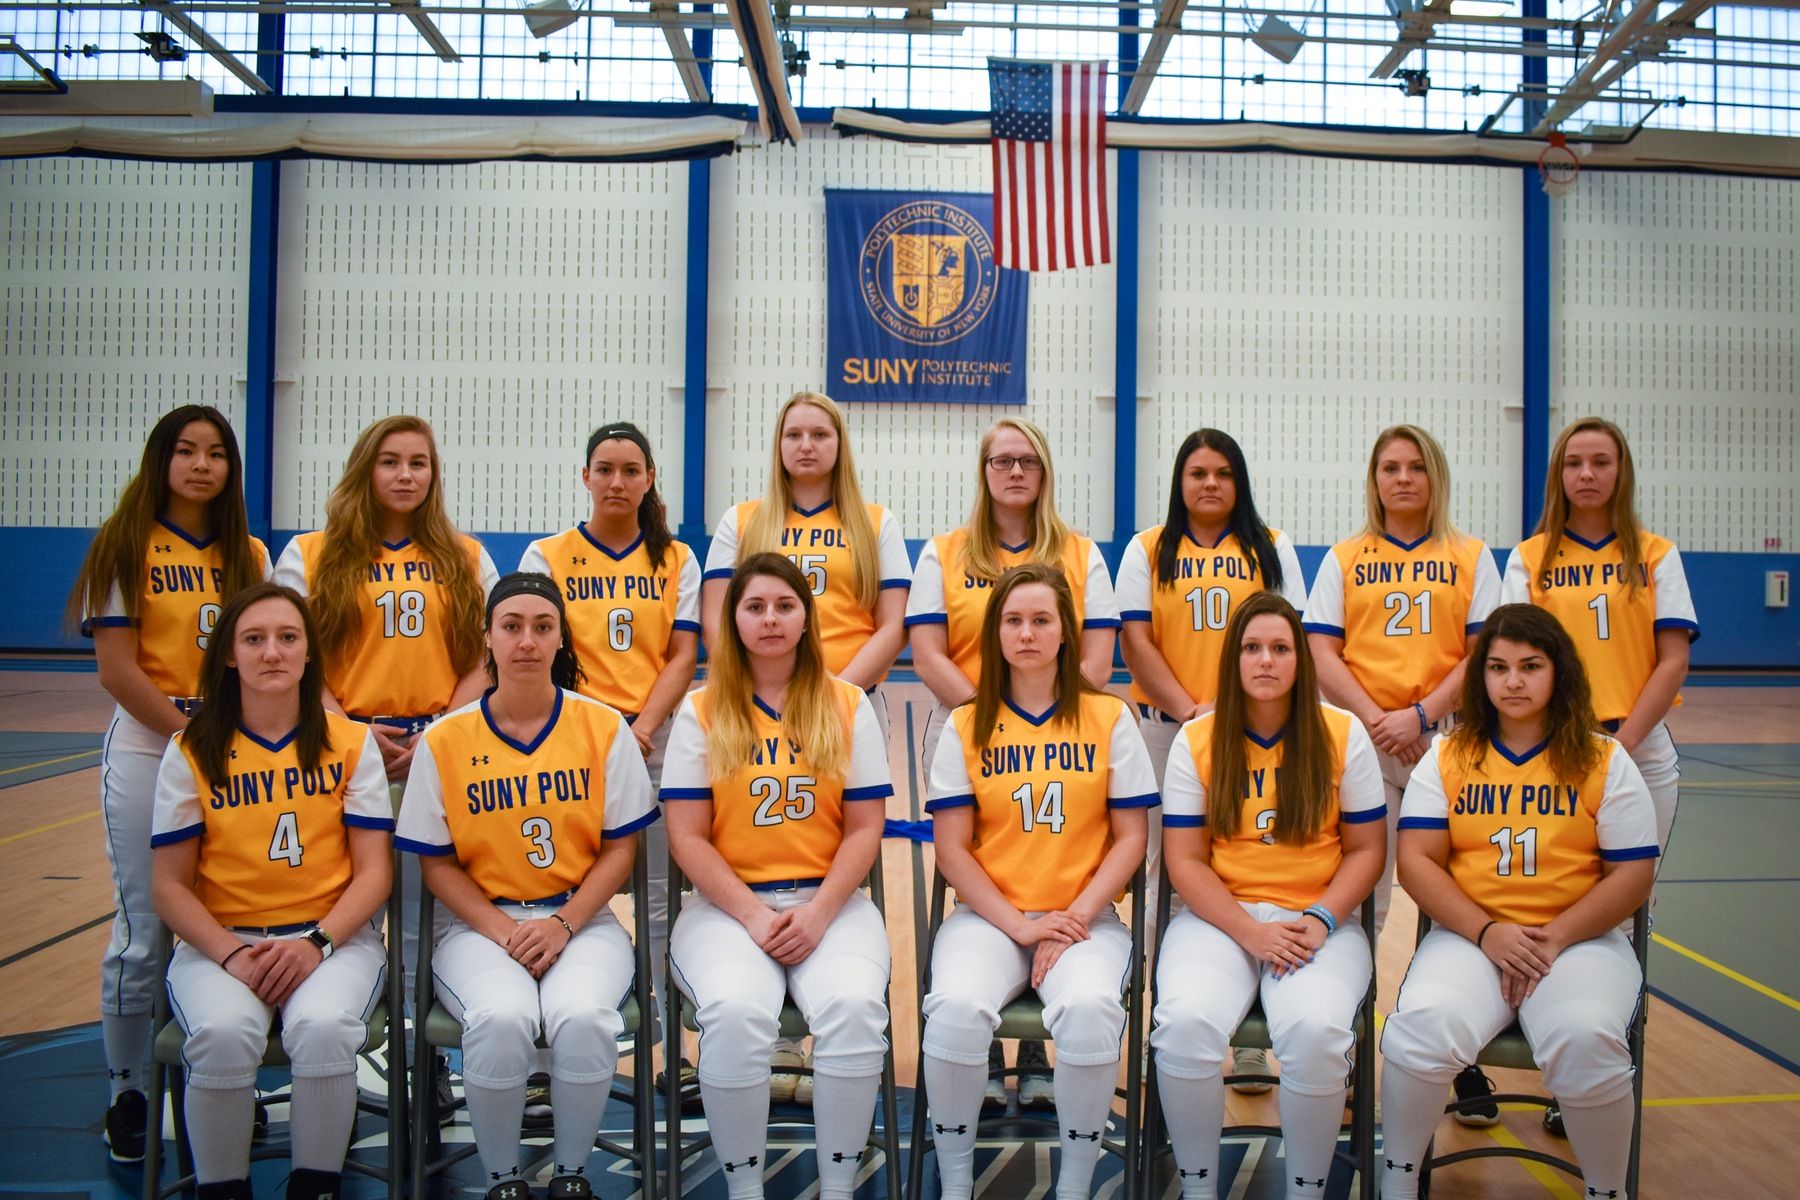 SB: Wildcat Season Comes to an End in the First Round of the NEAC Post Season.